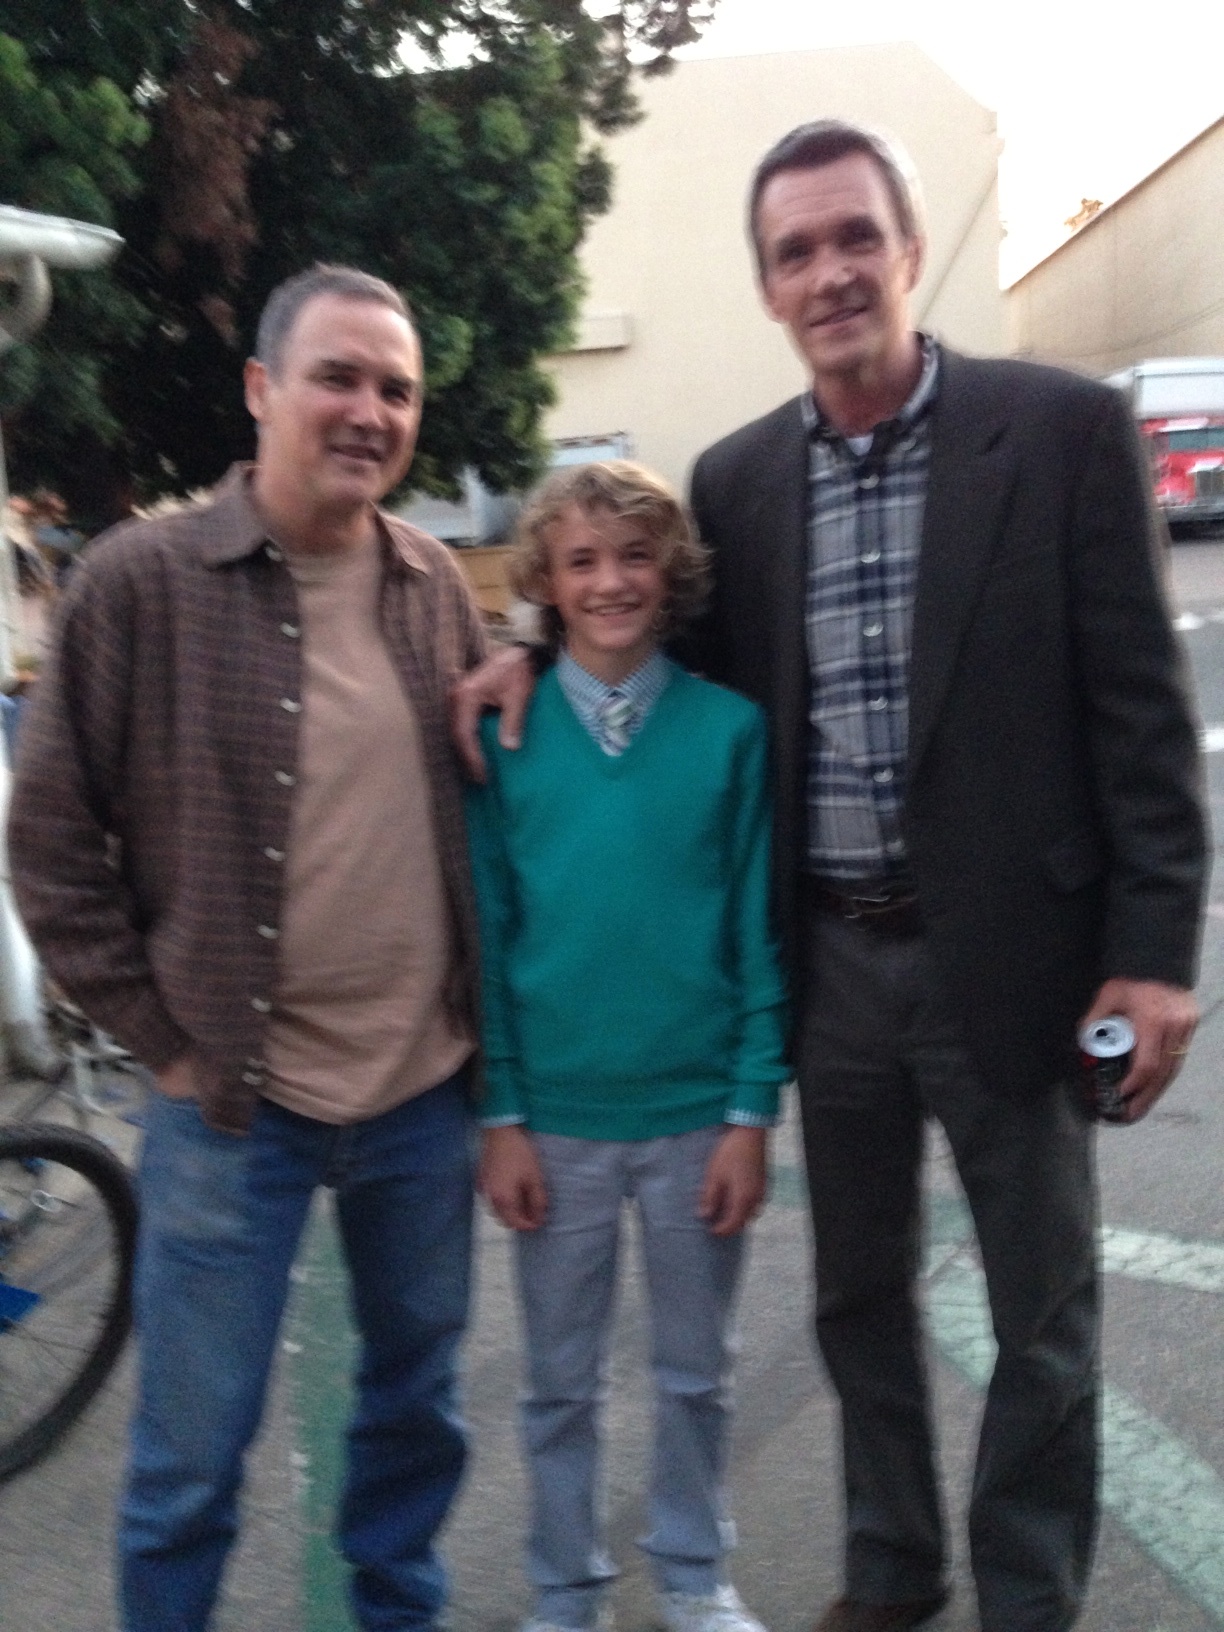 Jacob Melton as Sebastian along with actor Neil Flynn as Mike Heck onset at Warner Bros Ranch for ABC's 